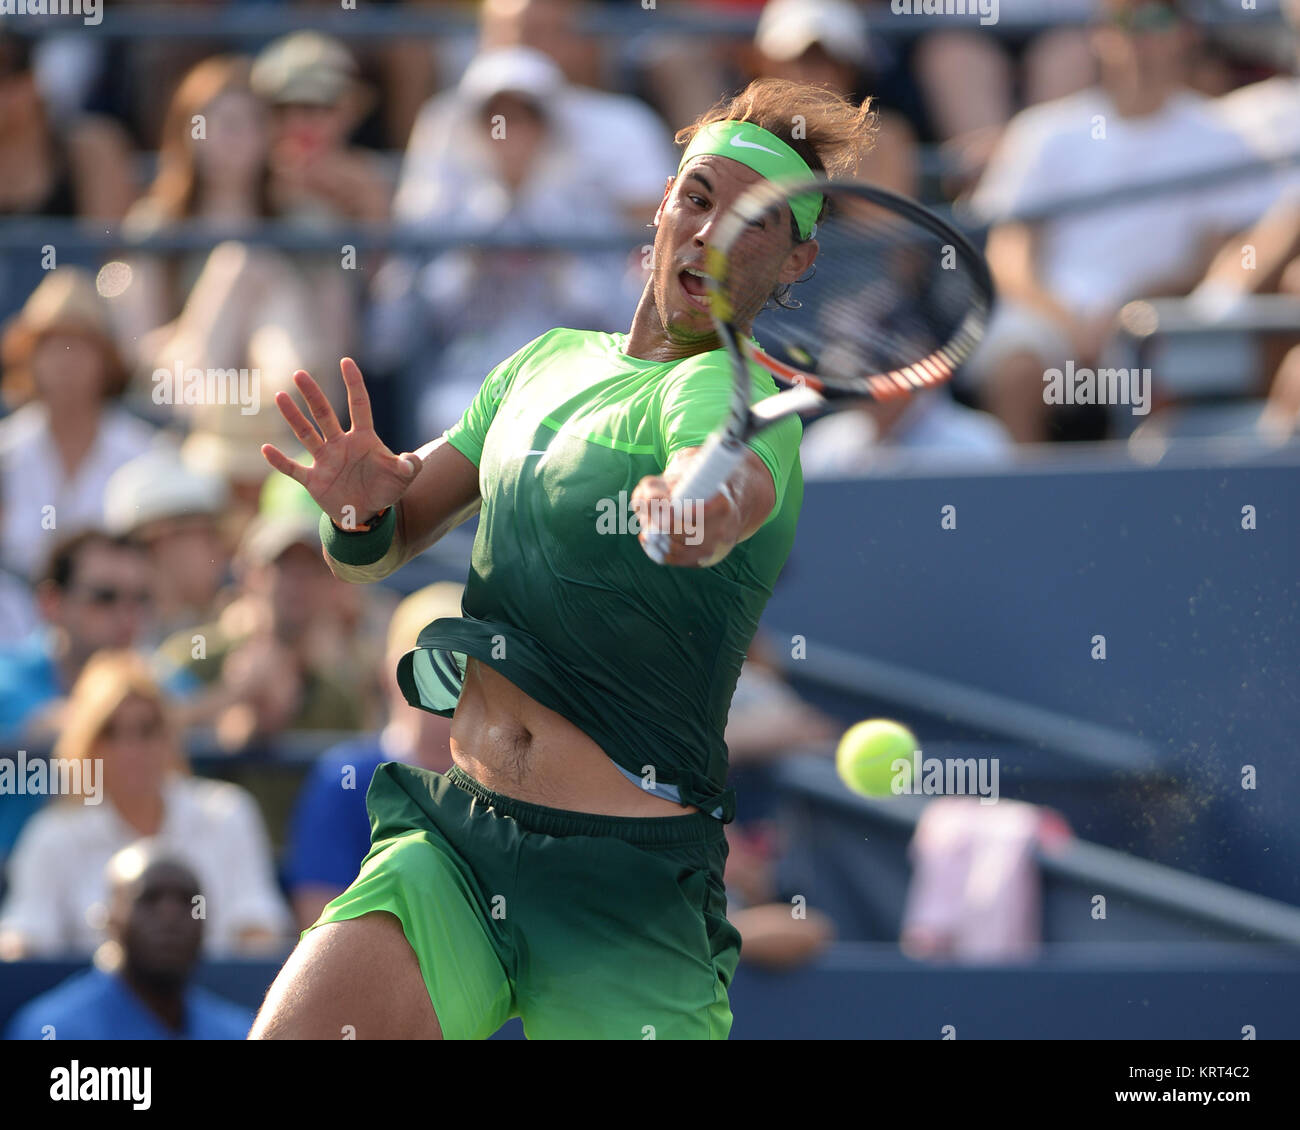 NEW YORK, NY - SEPTEMBER 02: Rafael Nadal of Spain serves defeats Diego Schwartzman of Argentina during their Men's Singles Second Round match on Day Three of the 2015 US Open at the USTA Billie Jean King National Tennis Center on September 2, 2015 in the Flushing neighborhood of the Queens borough of New York City.  People:  Rafael Nadal Stock Photo